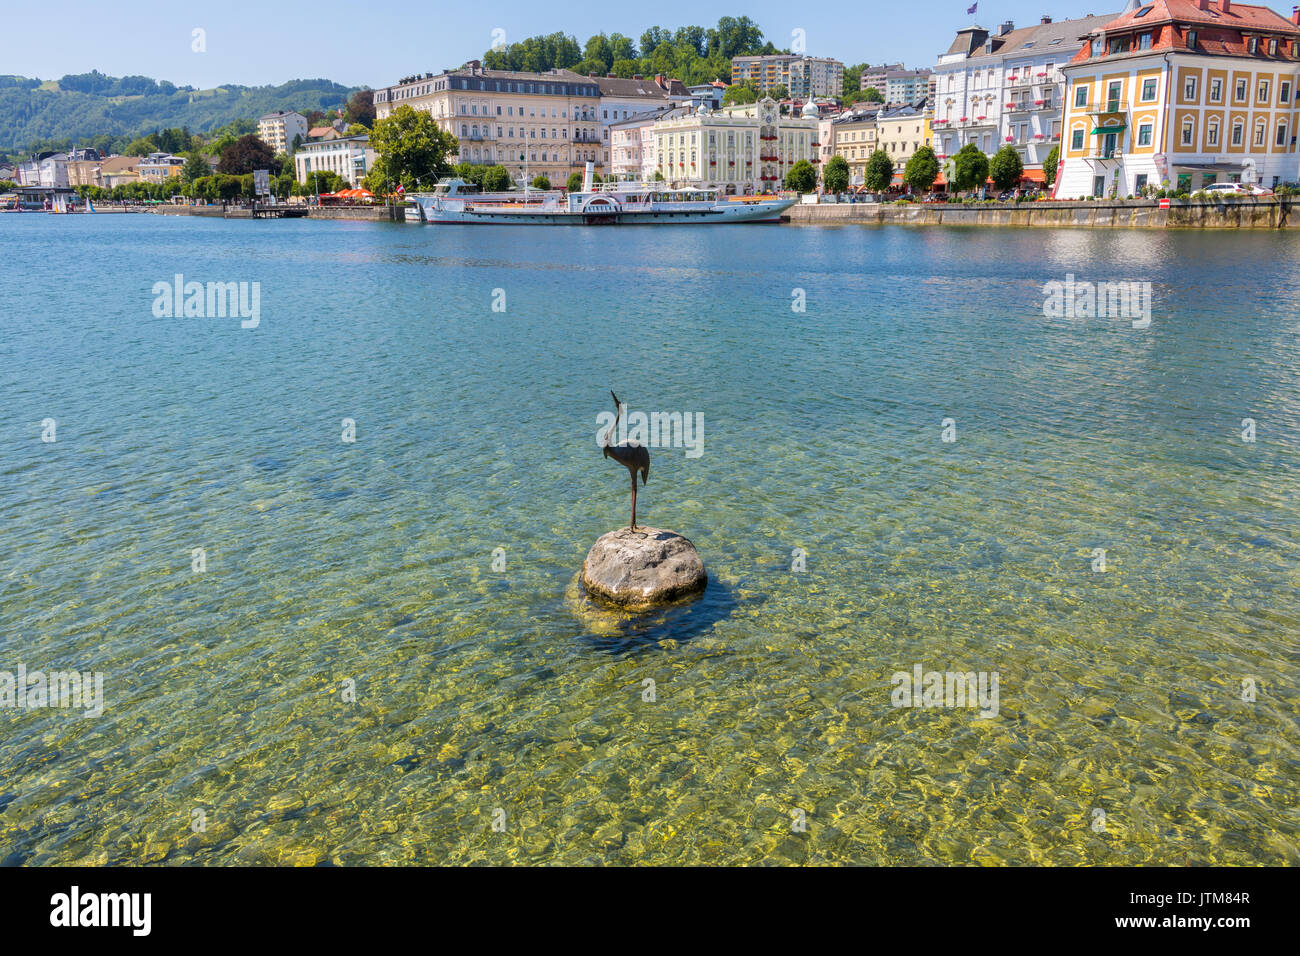 Traunsee lake  in Gmunden, Austria Stock Photo